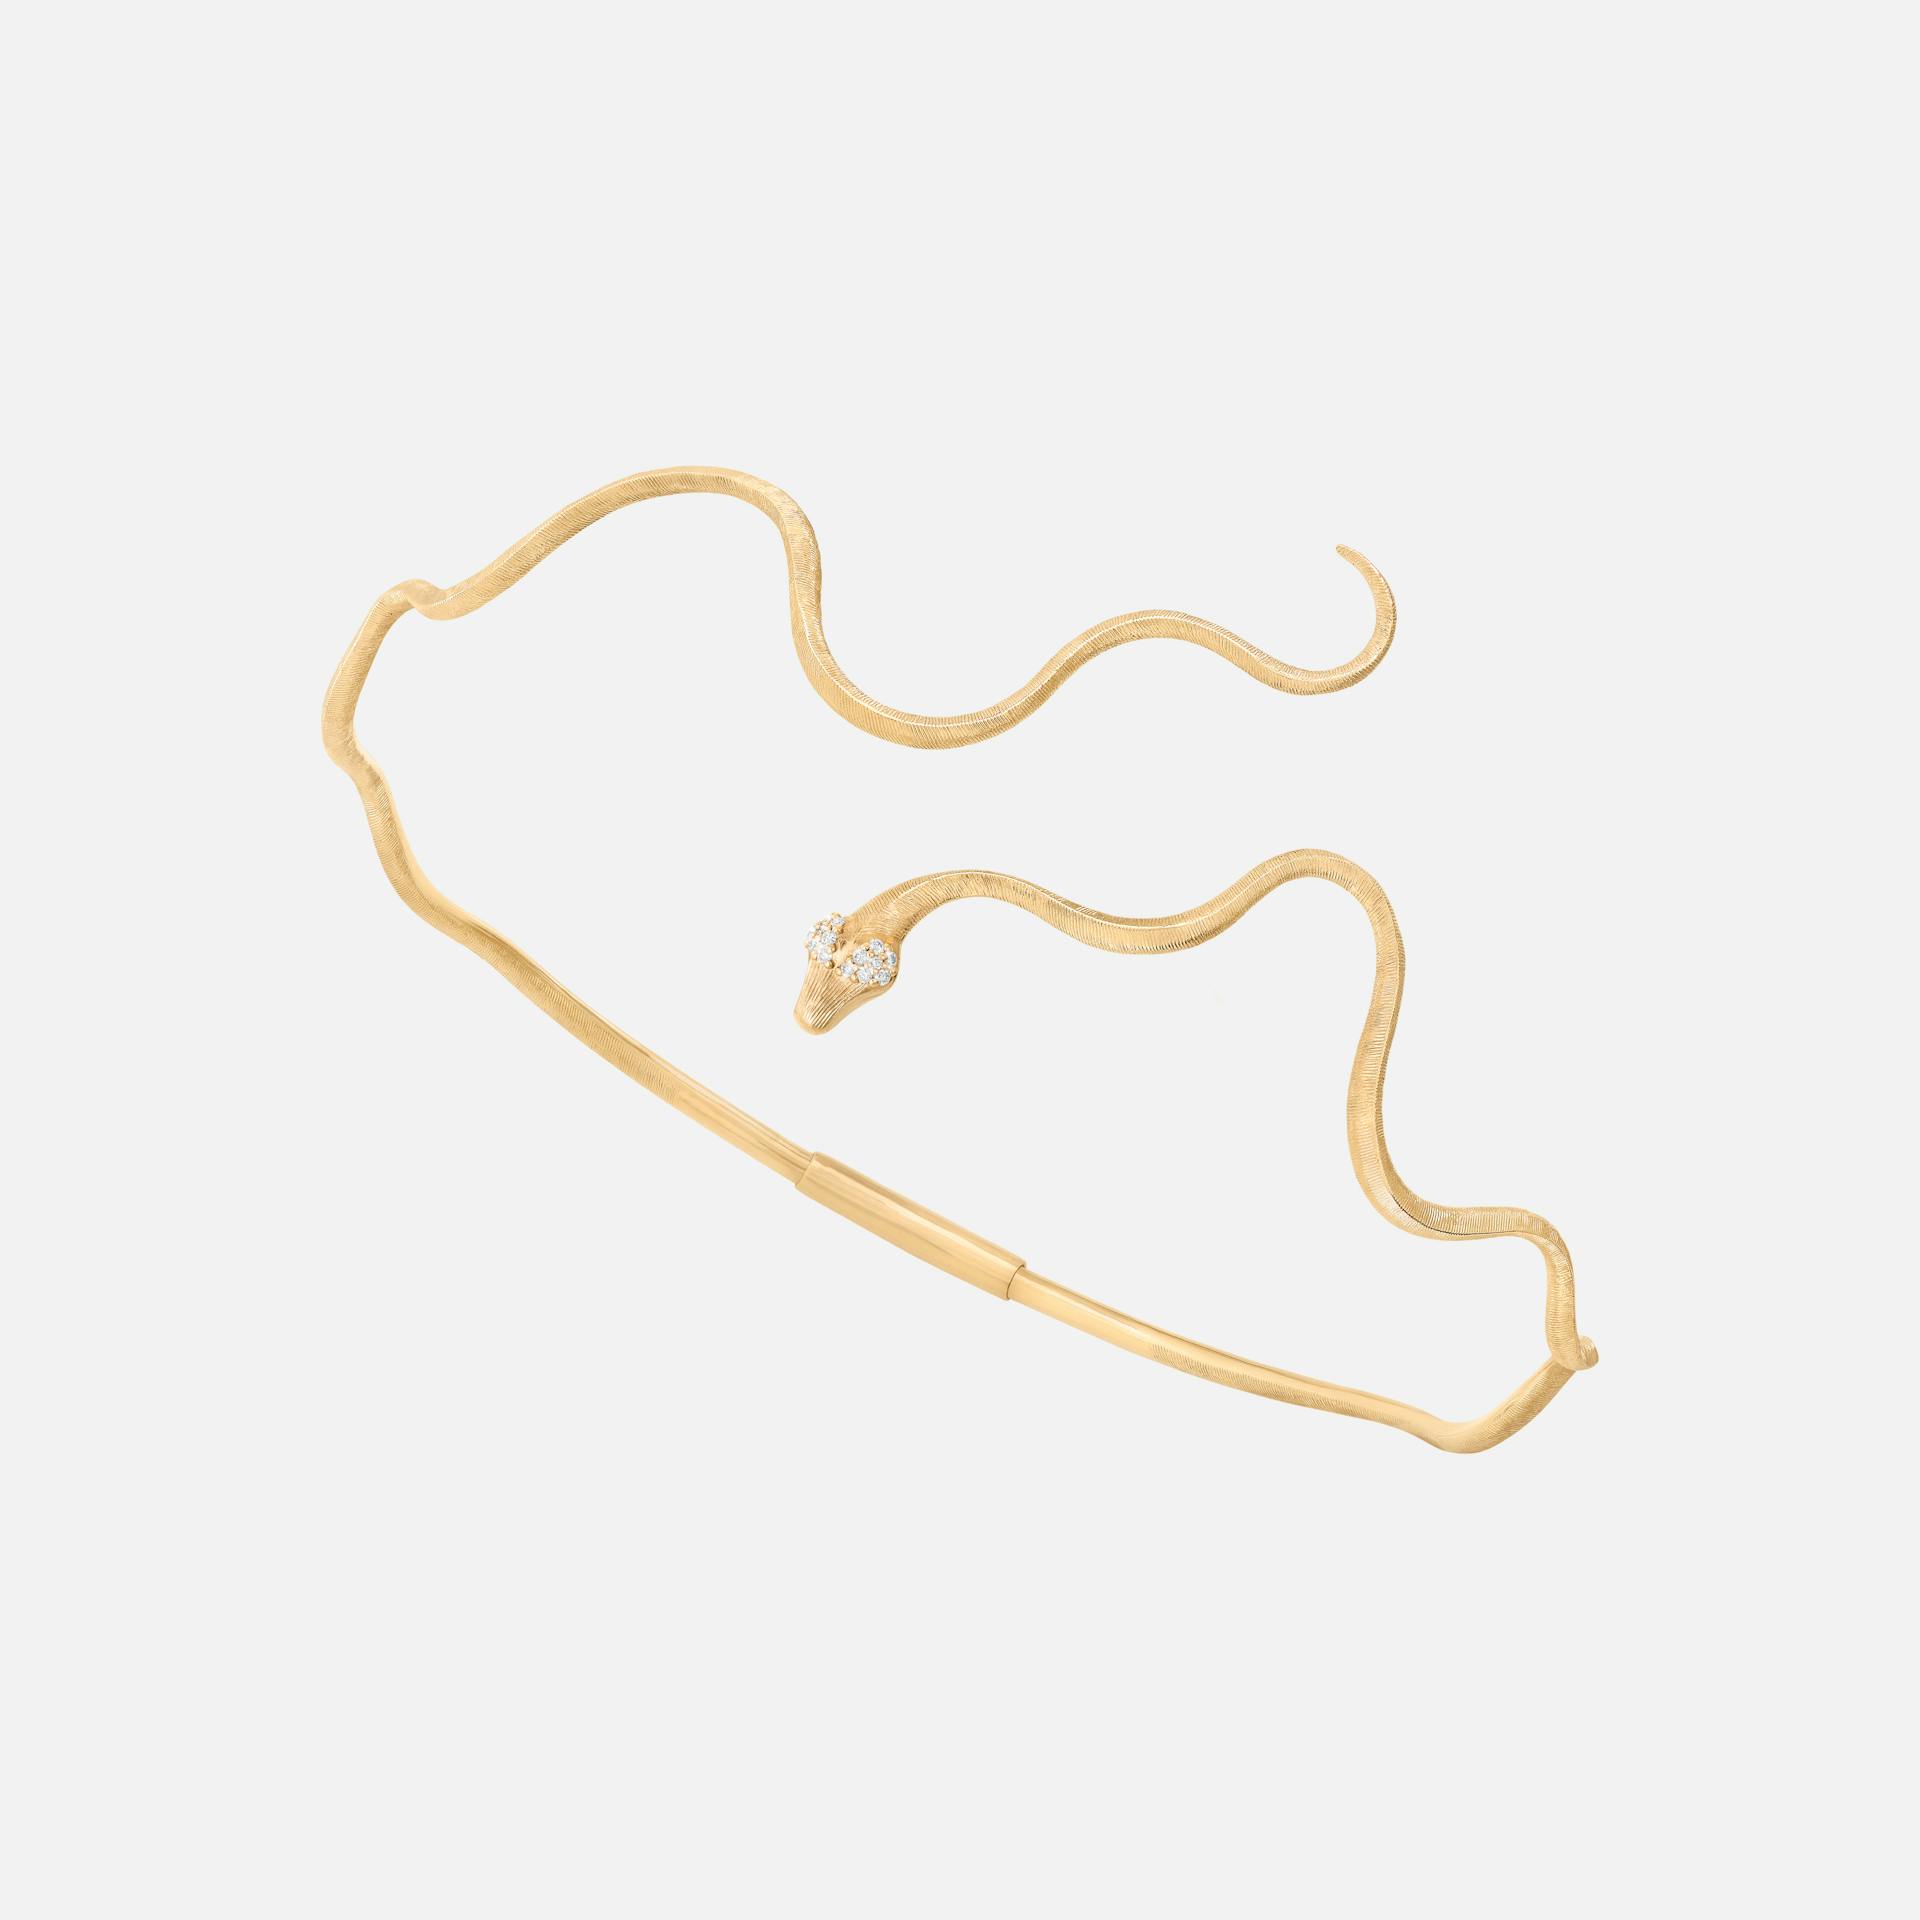 Snakes 37 cm Neck Bangle in Yellow Gold with Diamonds  |  Ole Lynggaard Copenhagen 